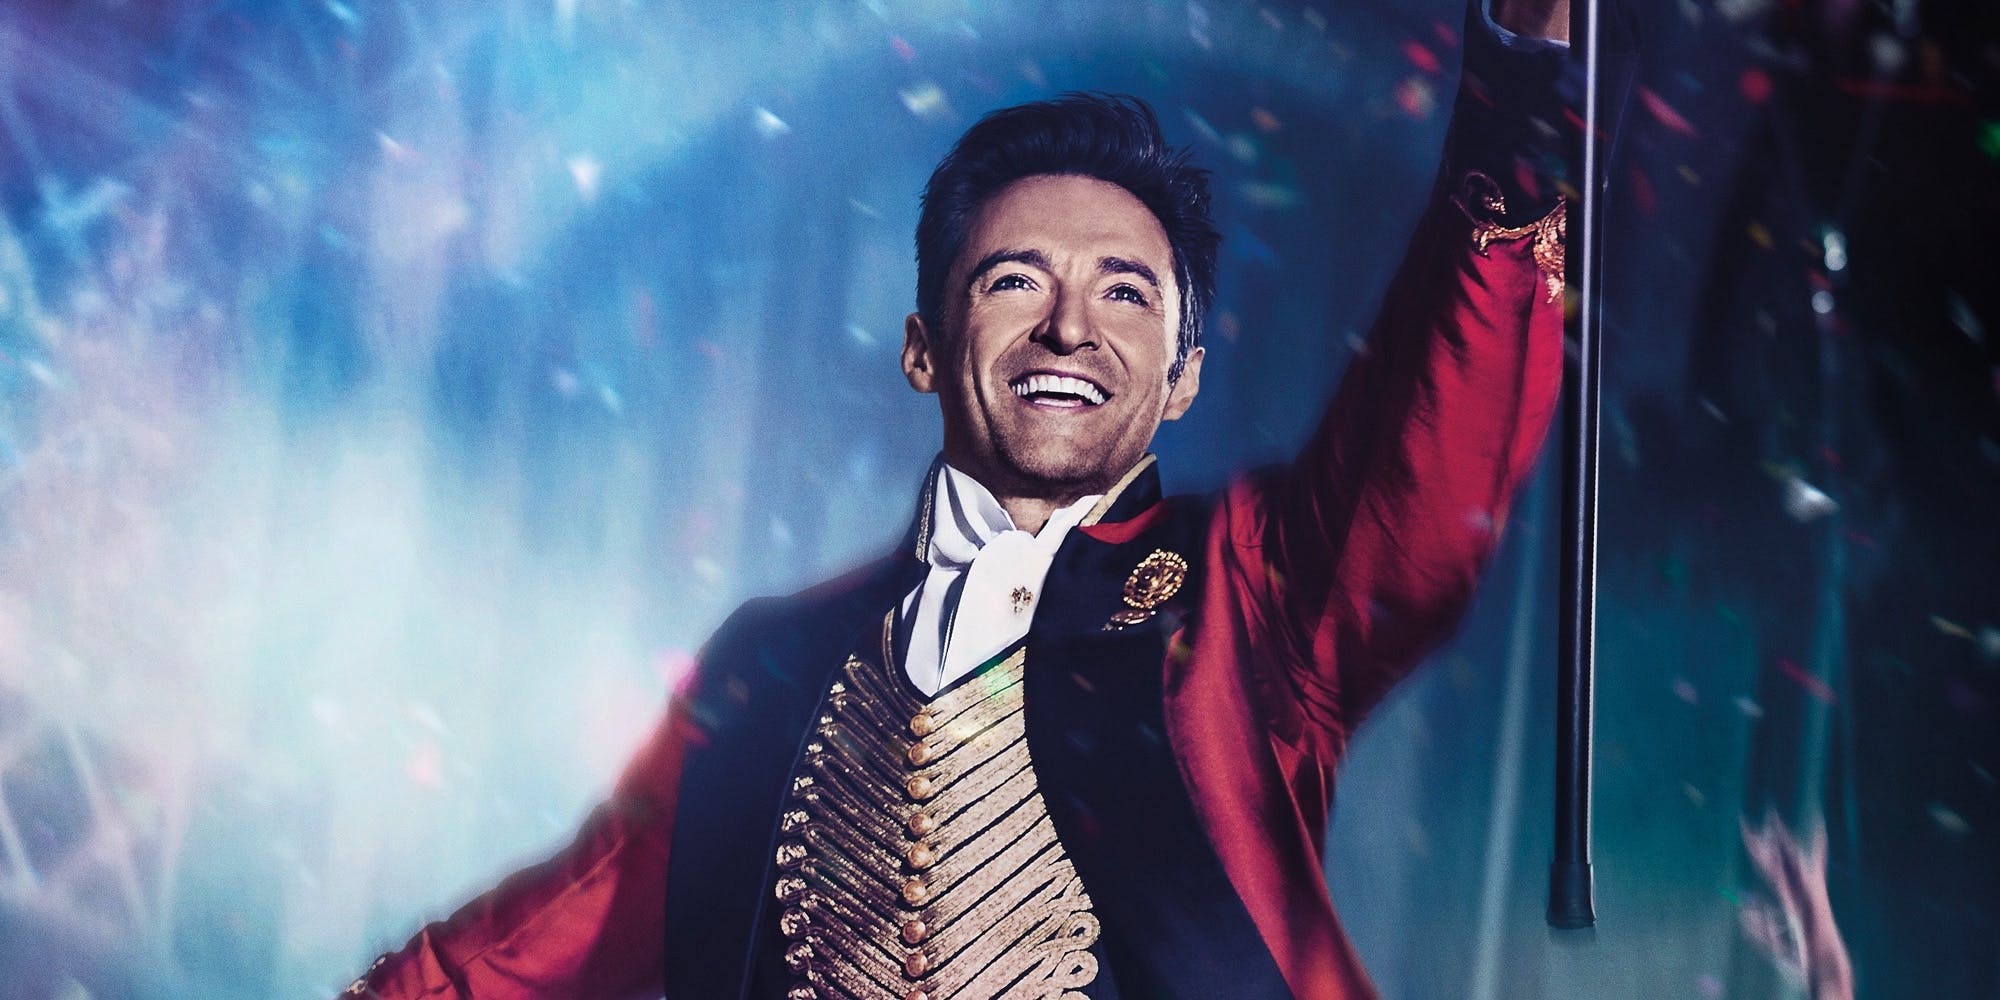 The Greatest Showman: A Perfect Way to Wrap Up the Year